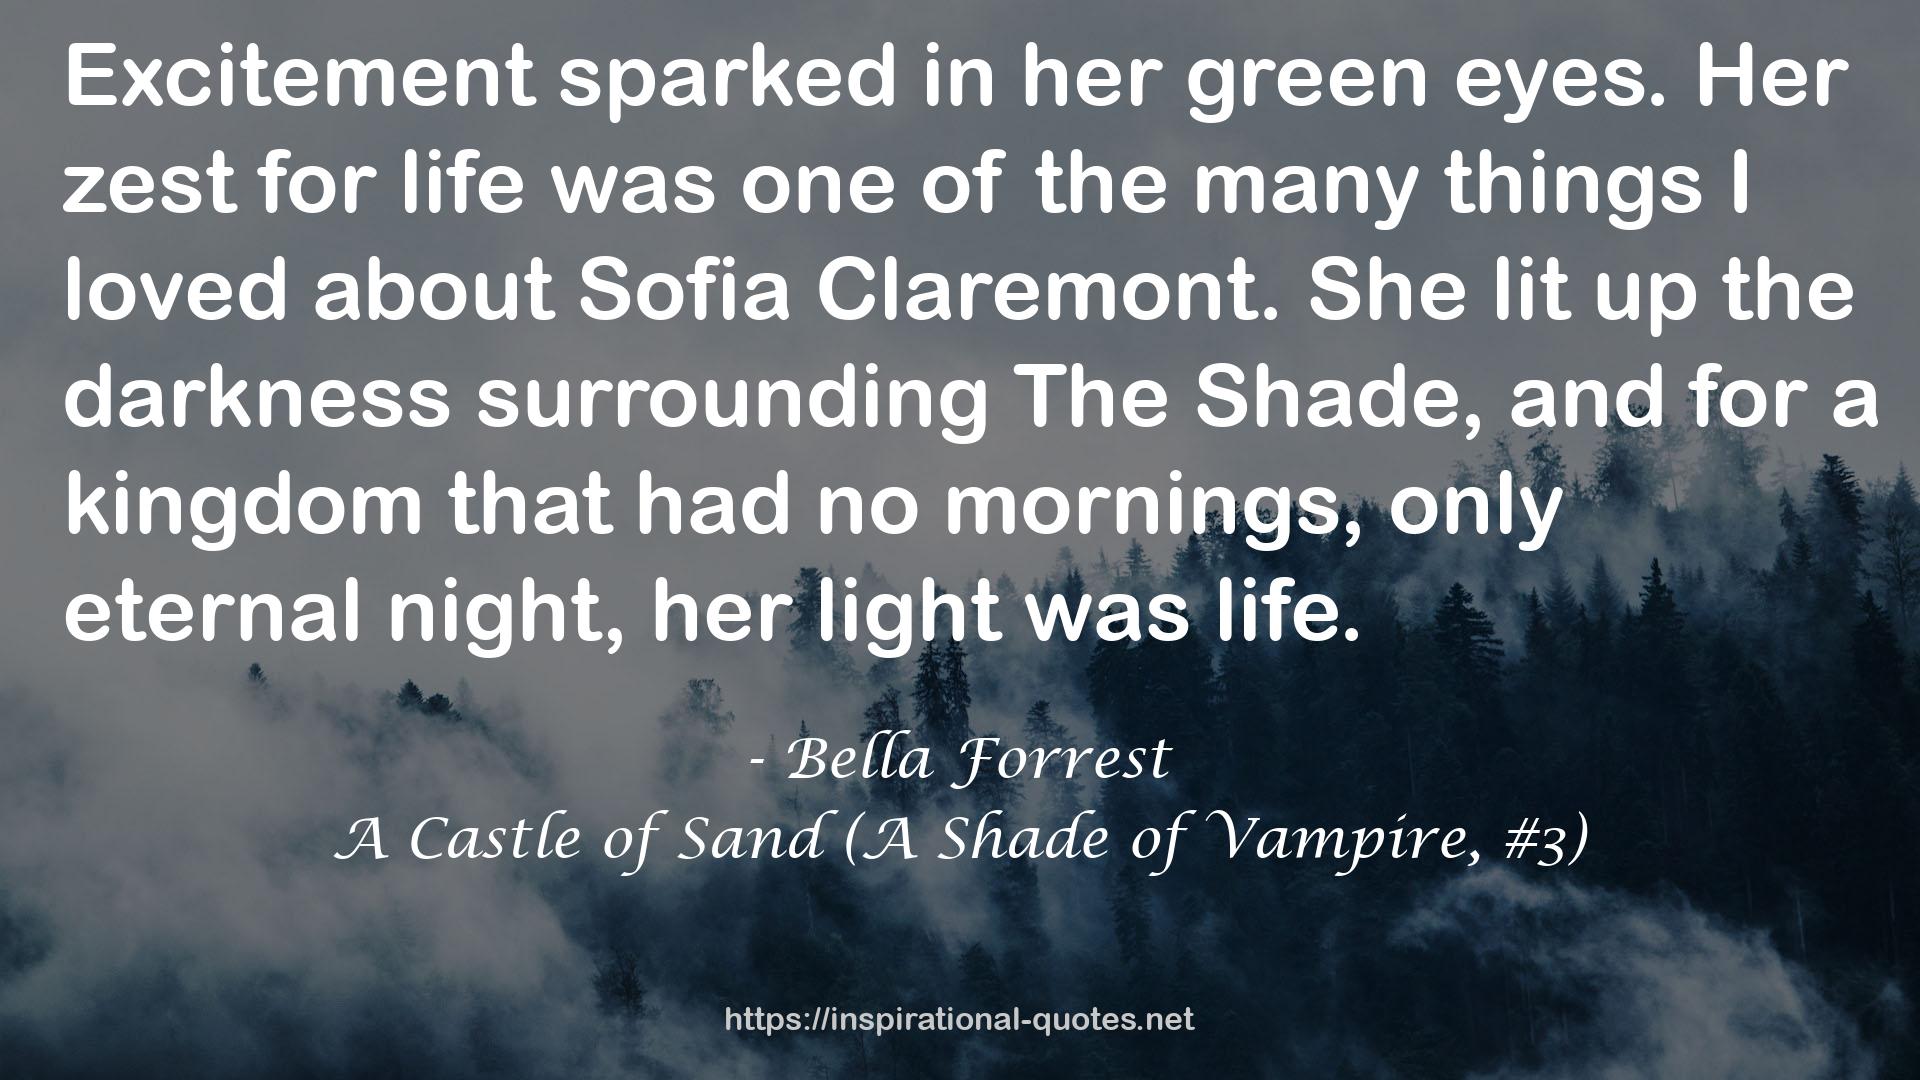 A Castle of Sand (A Shade of Vampire, #3) QUOTES